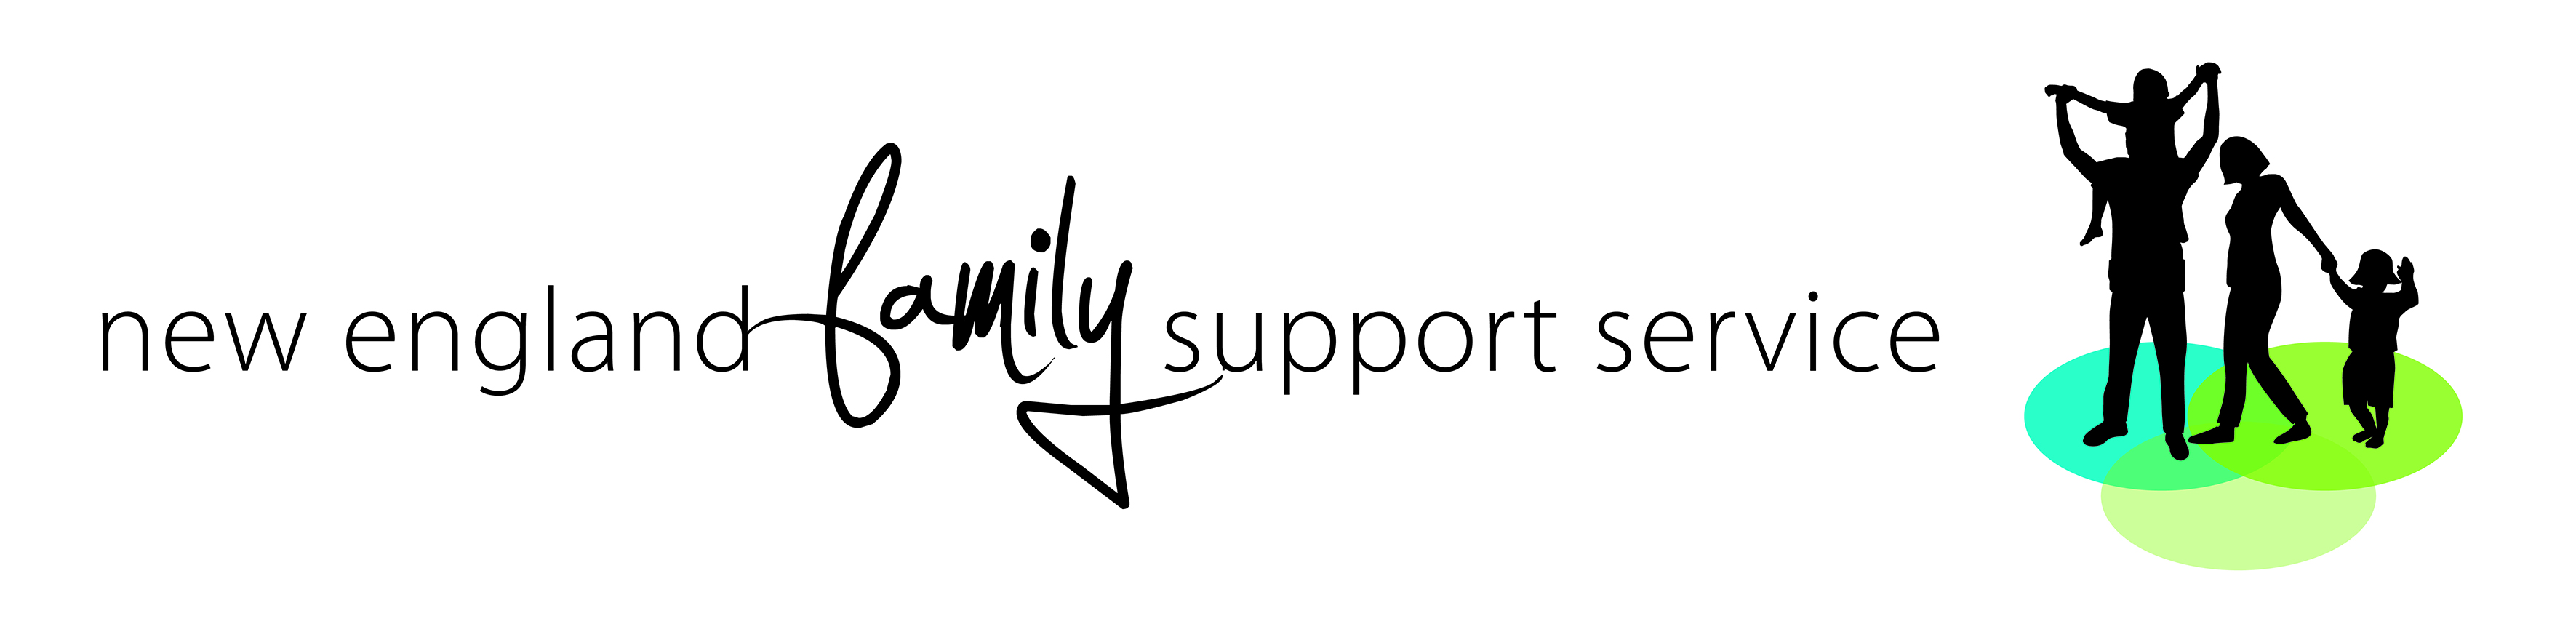 Armidale Family Support Service Inc. t/as New England Family Support Service